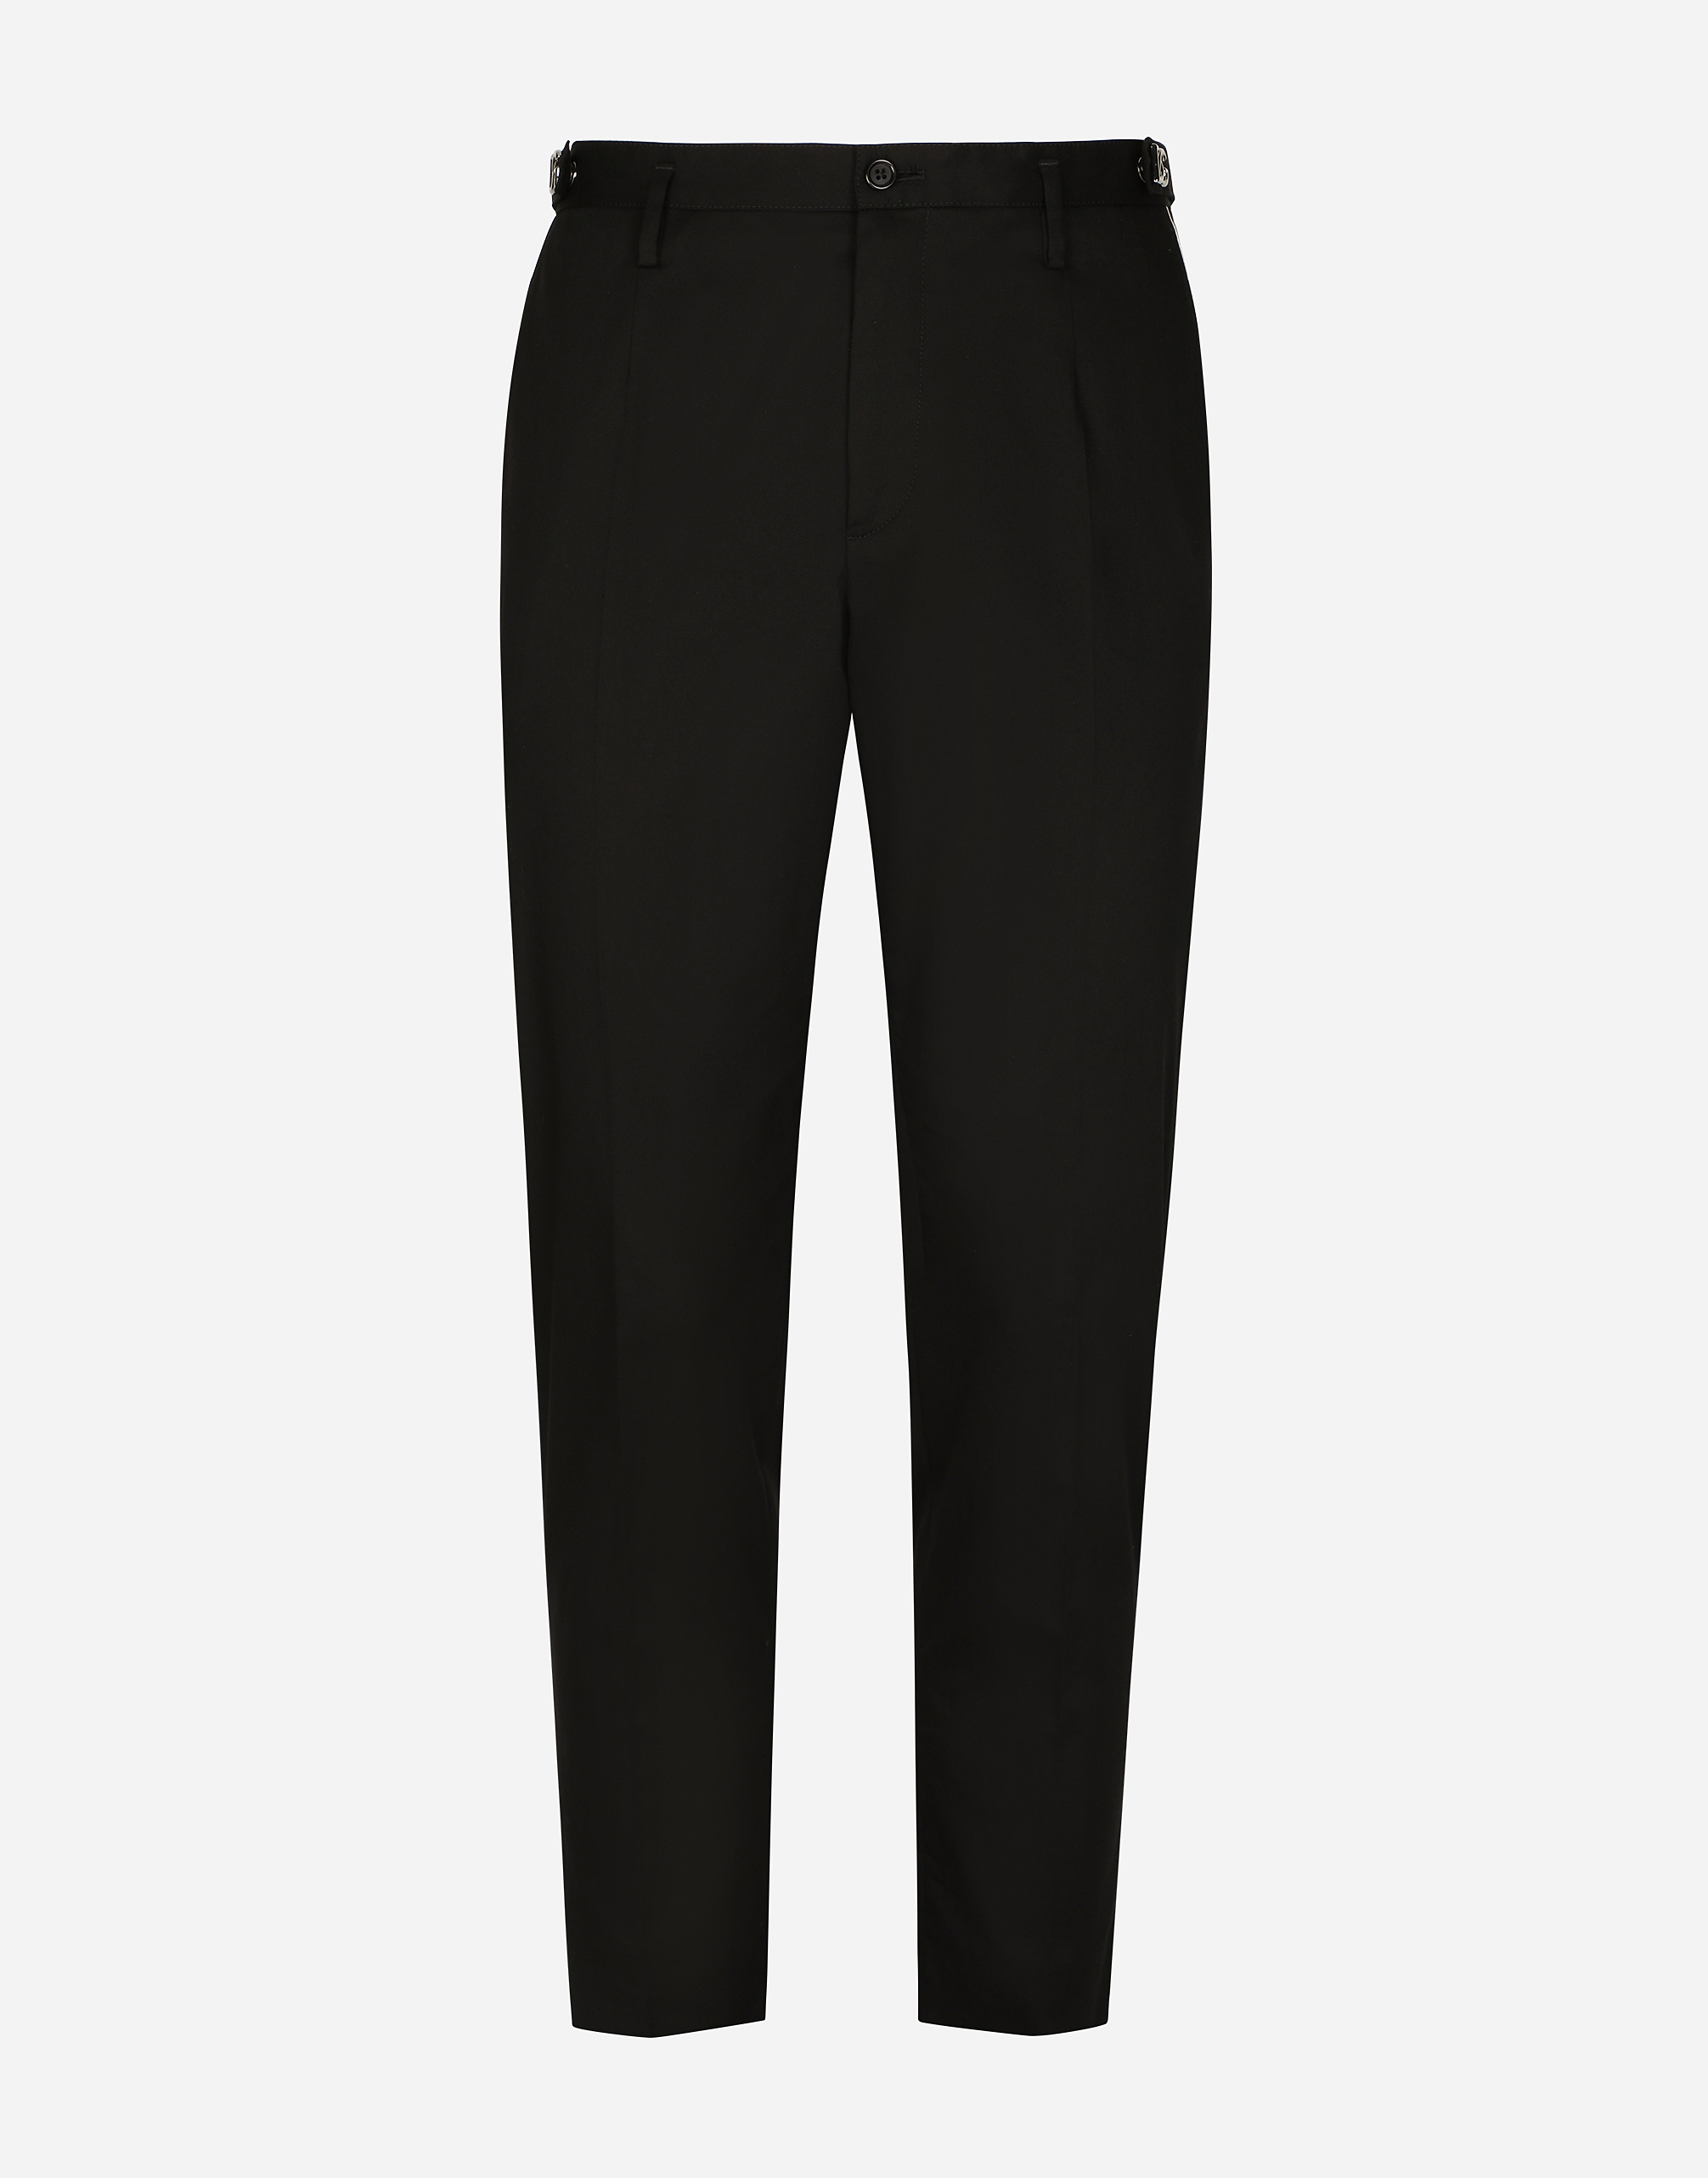 Stretch cotton pants with DG hardware in Black